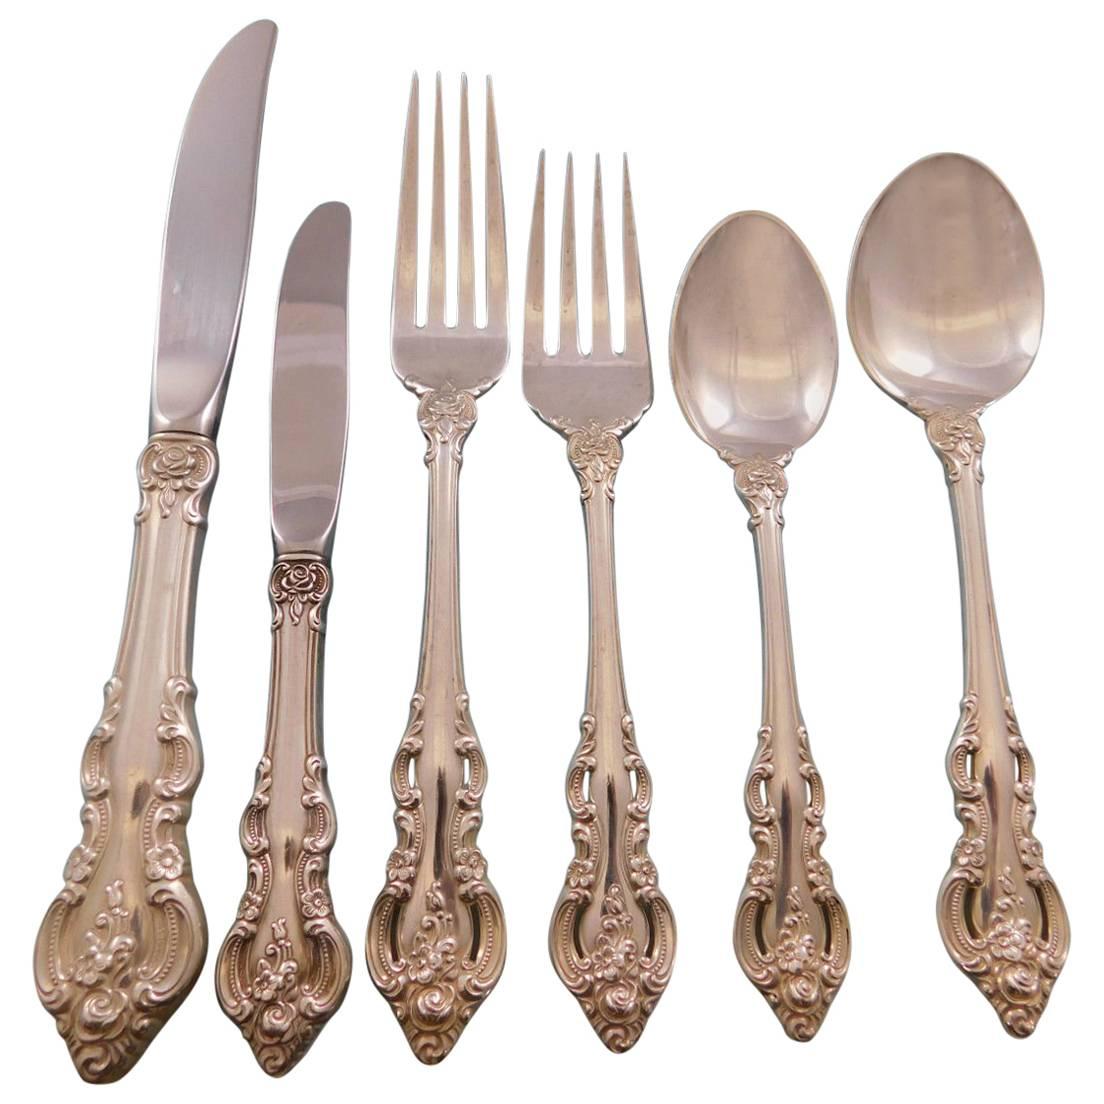 El Grandee by Towle Sterling Silver Flatware Set for 8 Service 55 Pieces